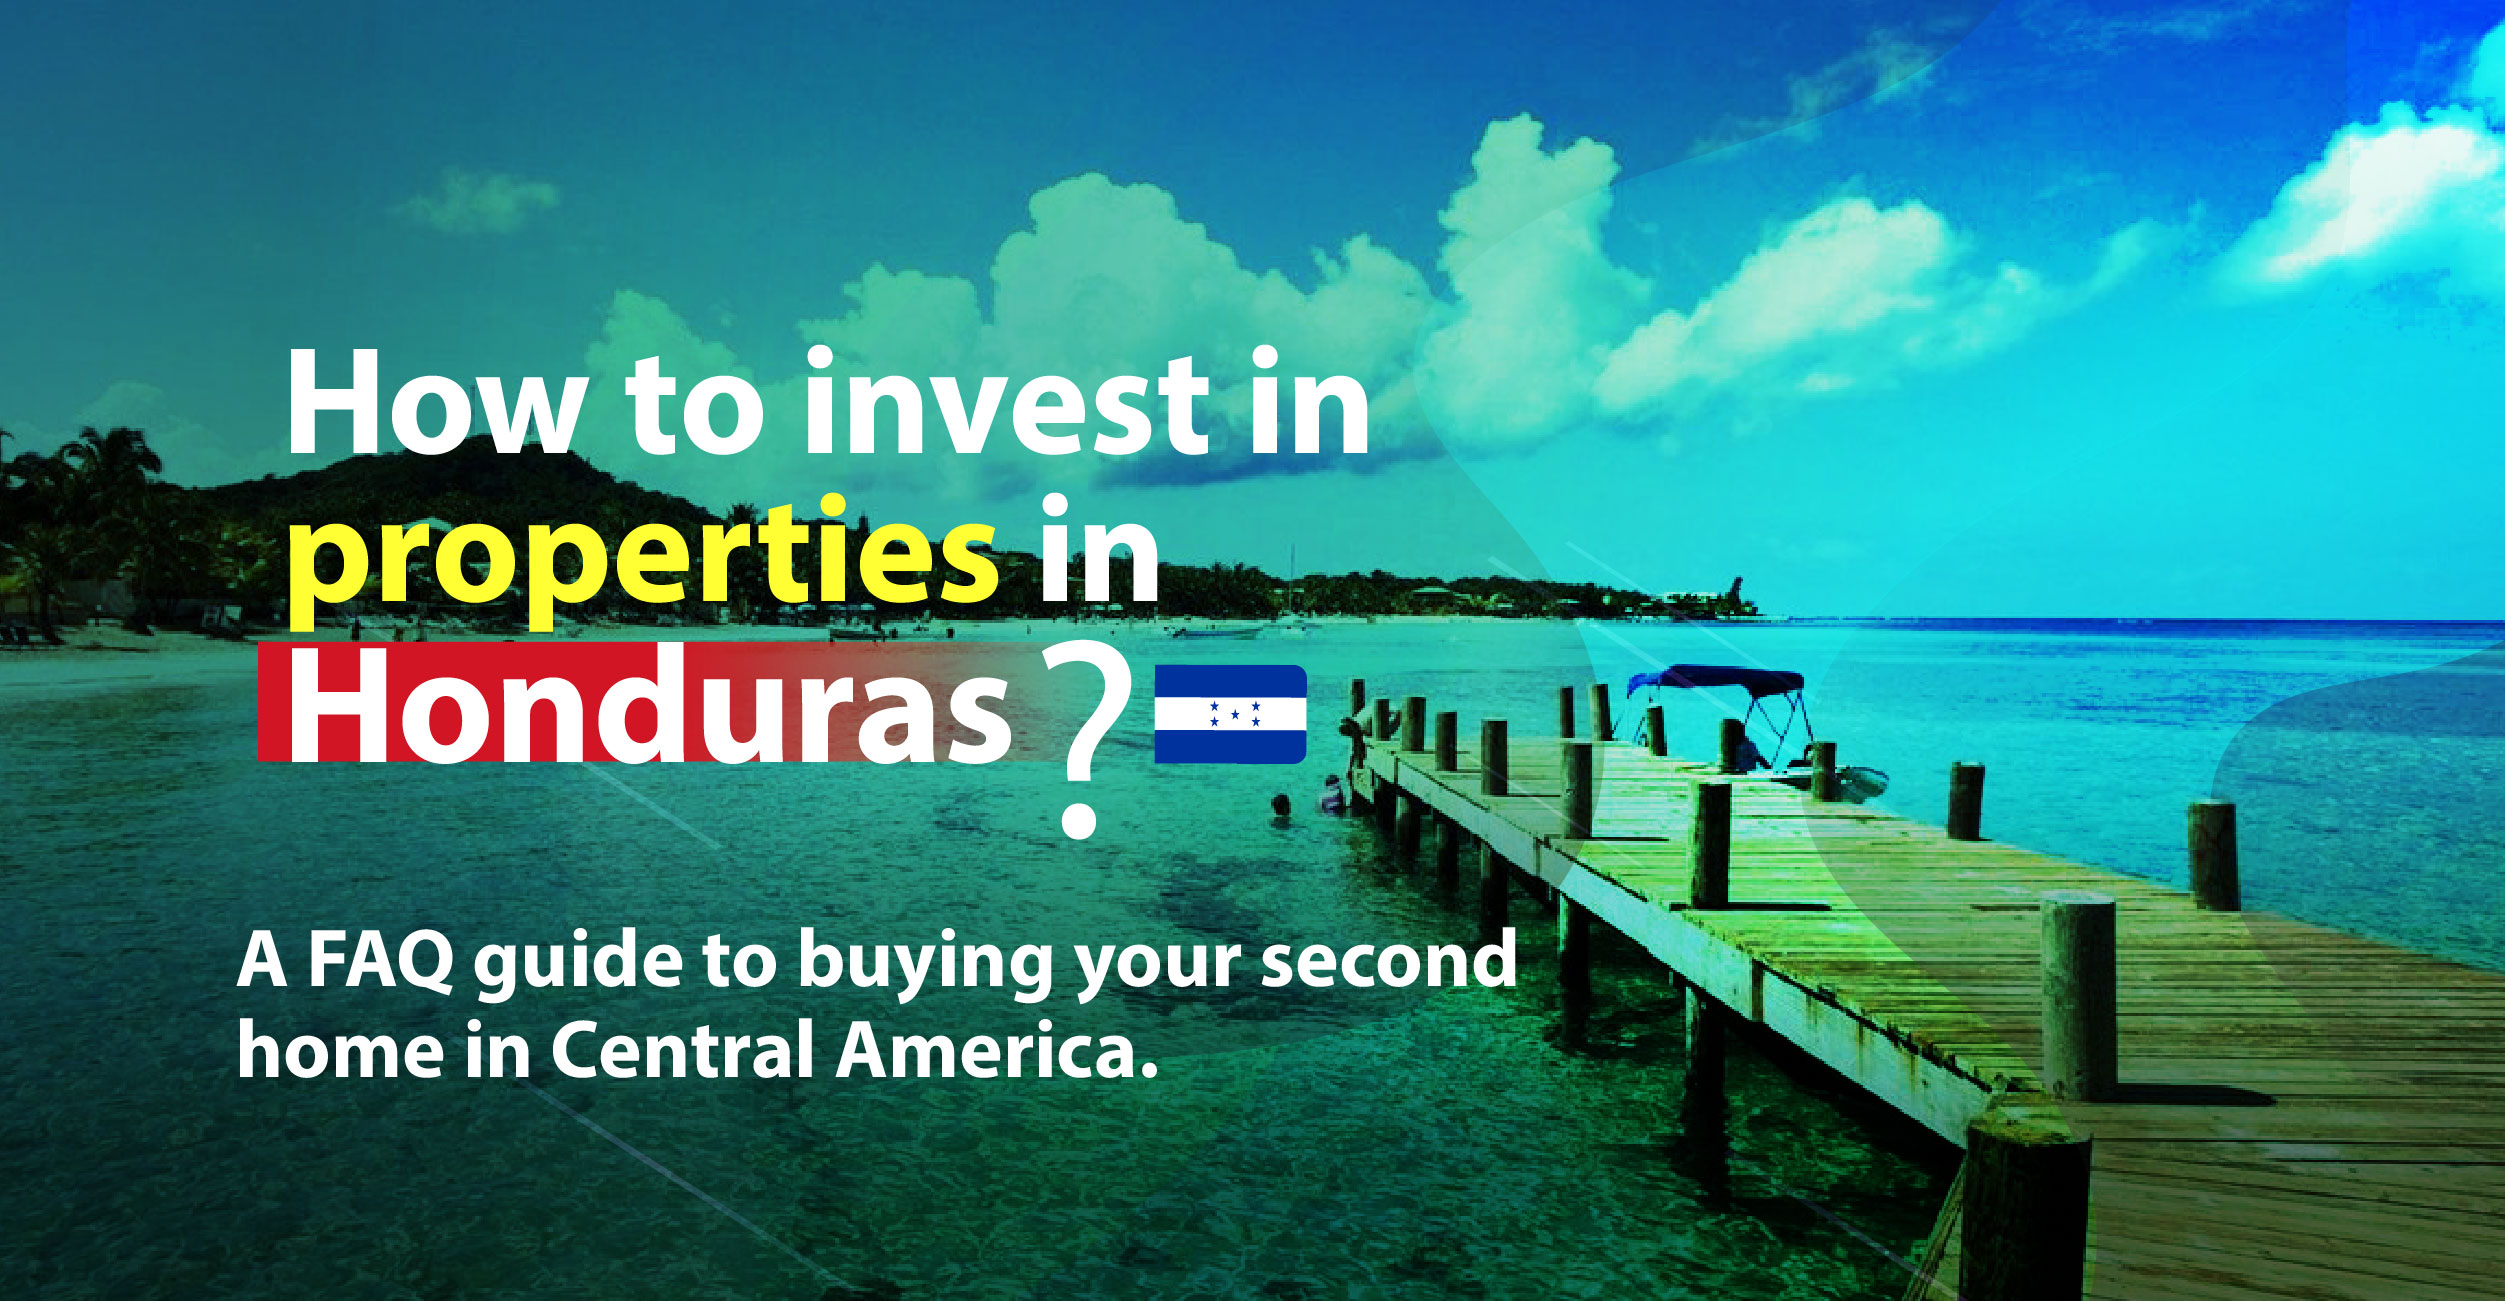 How to invest in properties in Honduras? - A FAQ guide to buying your second home in Central America.